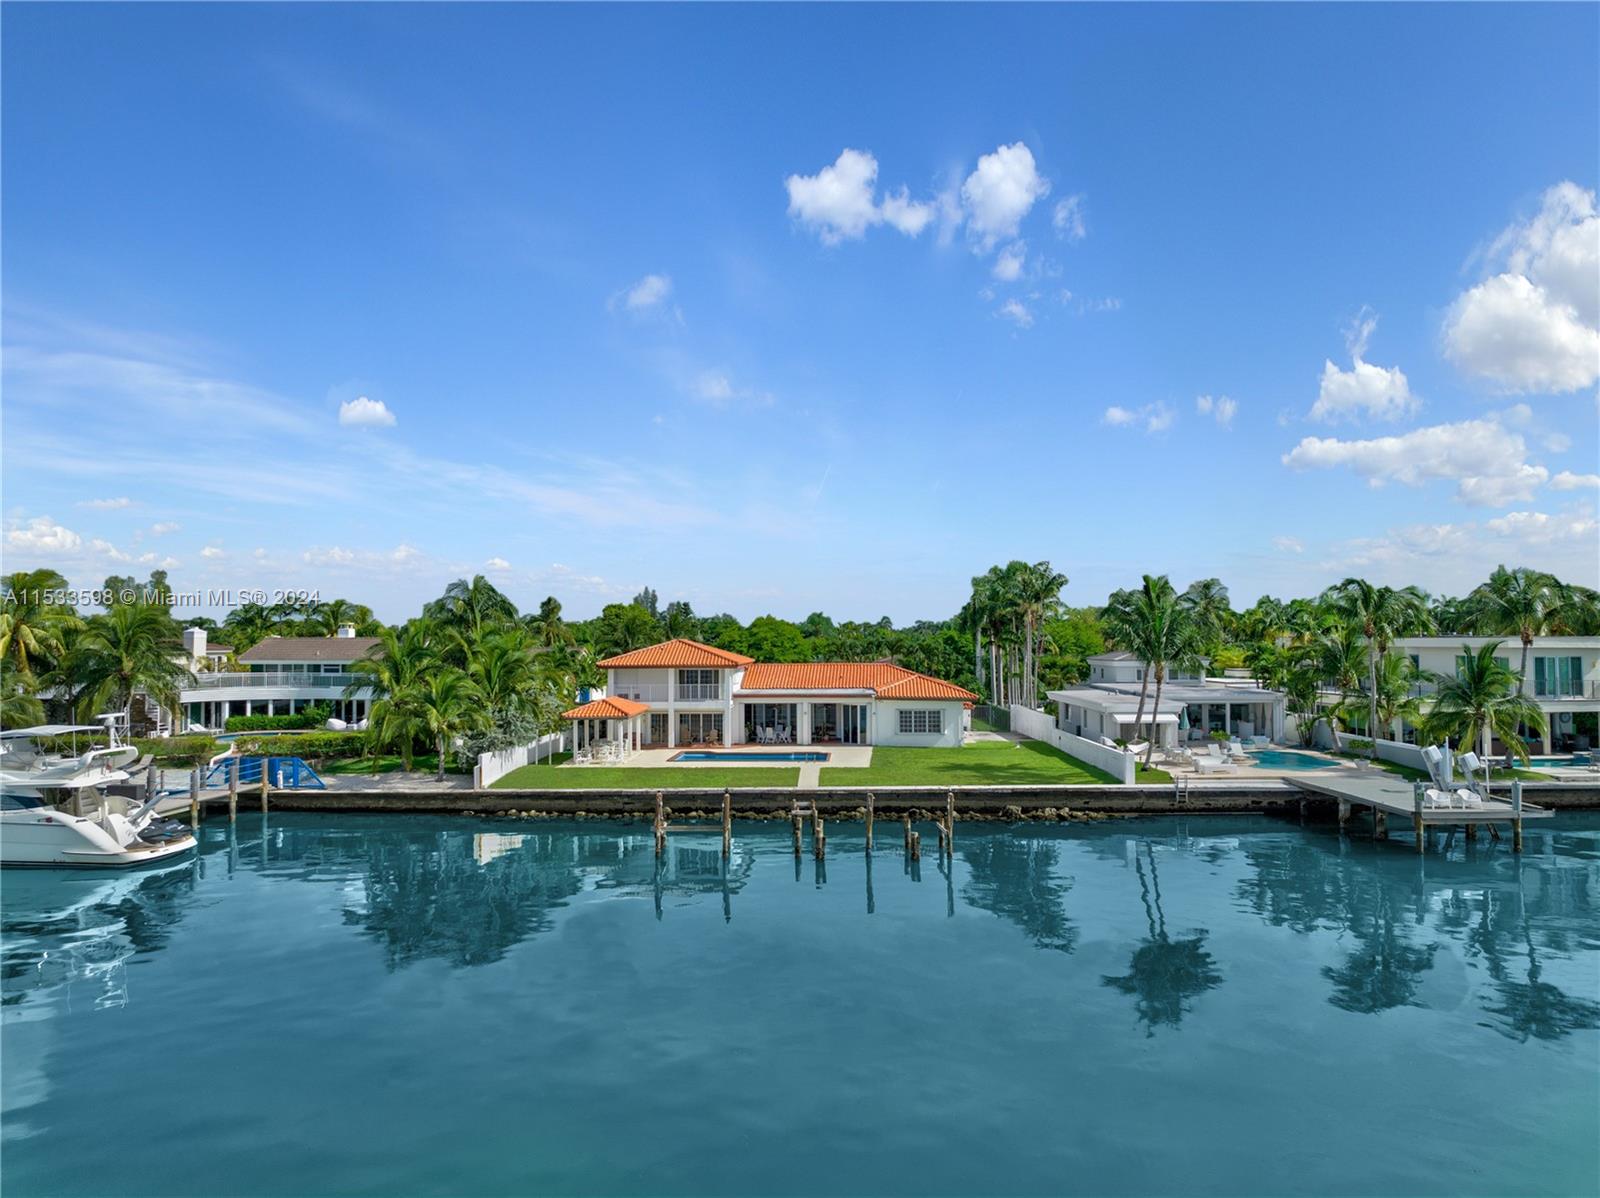 This 17,340 square foot double lot with its 102 feet of South facing waterfront has all the elements to transform into a dream home. Fits a yacht? Check. No bridges? Check. Unobstructed waterfront views? Check, check, check. Mediterranean vacations may not last forever, but waterfront living can! Follow the sun & uncover this unmatched, rare development opportunity in the quiet, secure streets of Normandy Isles.